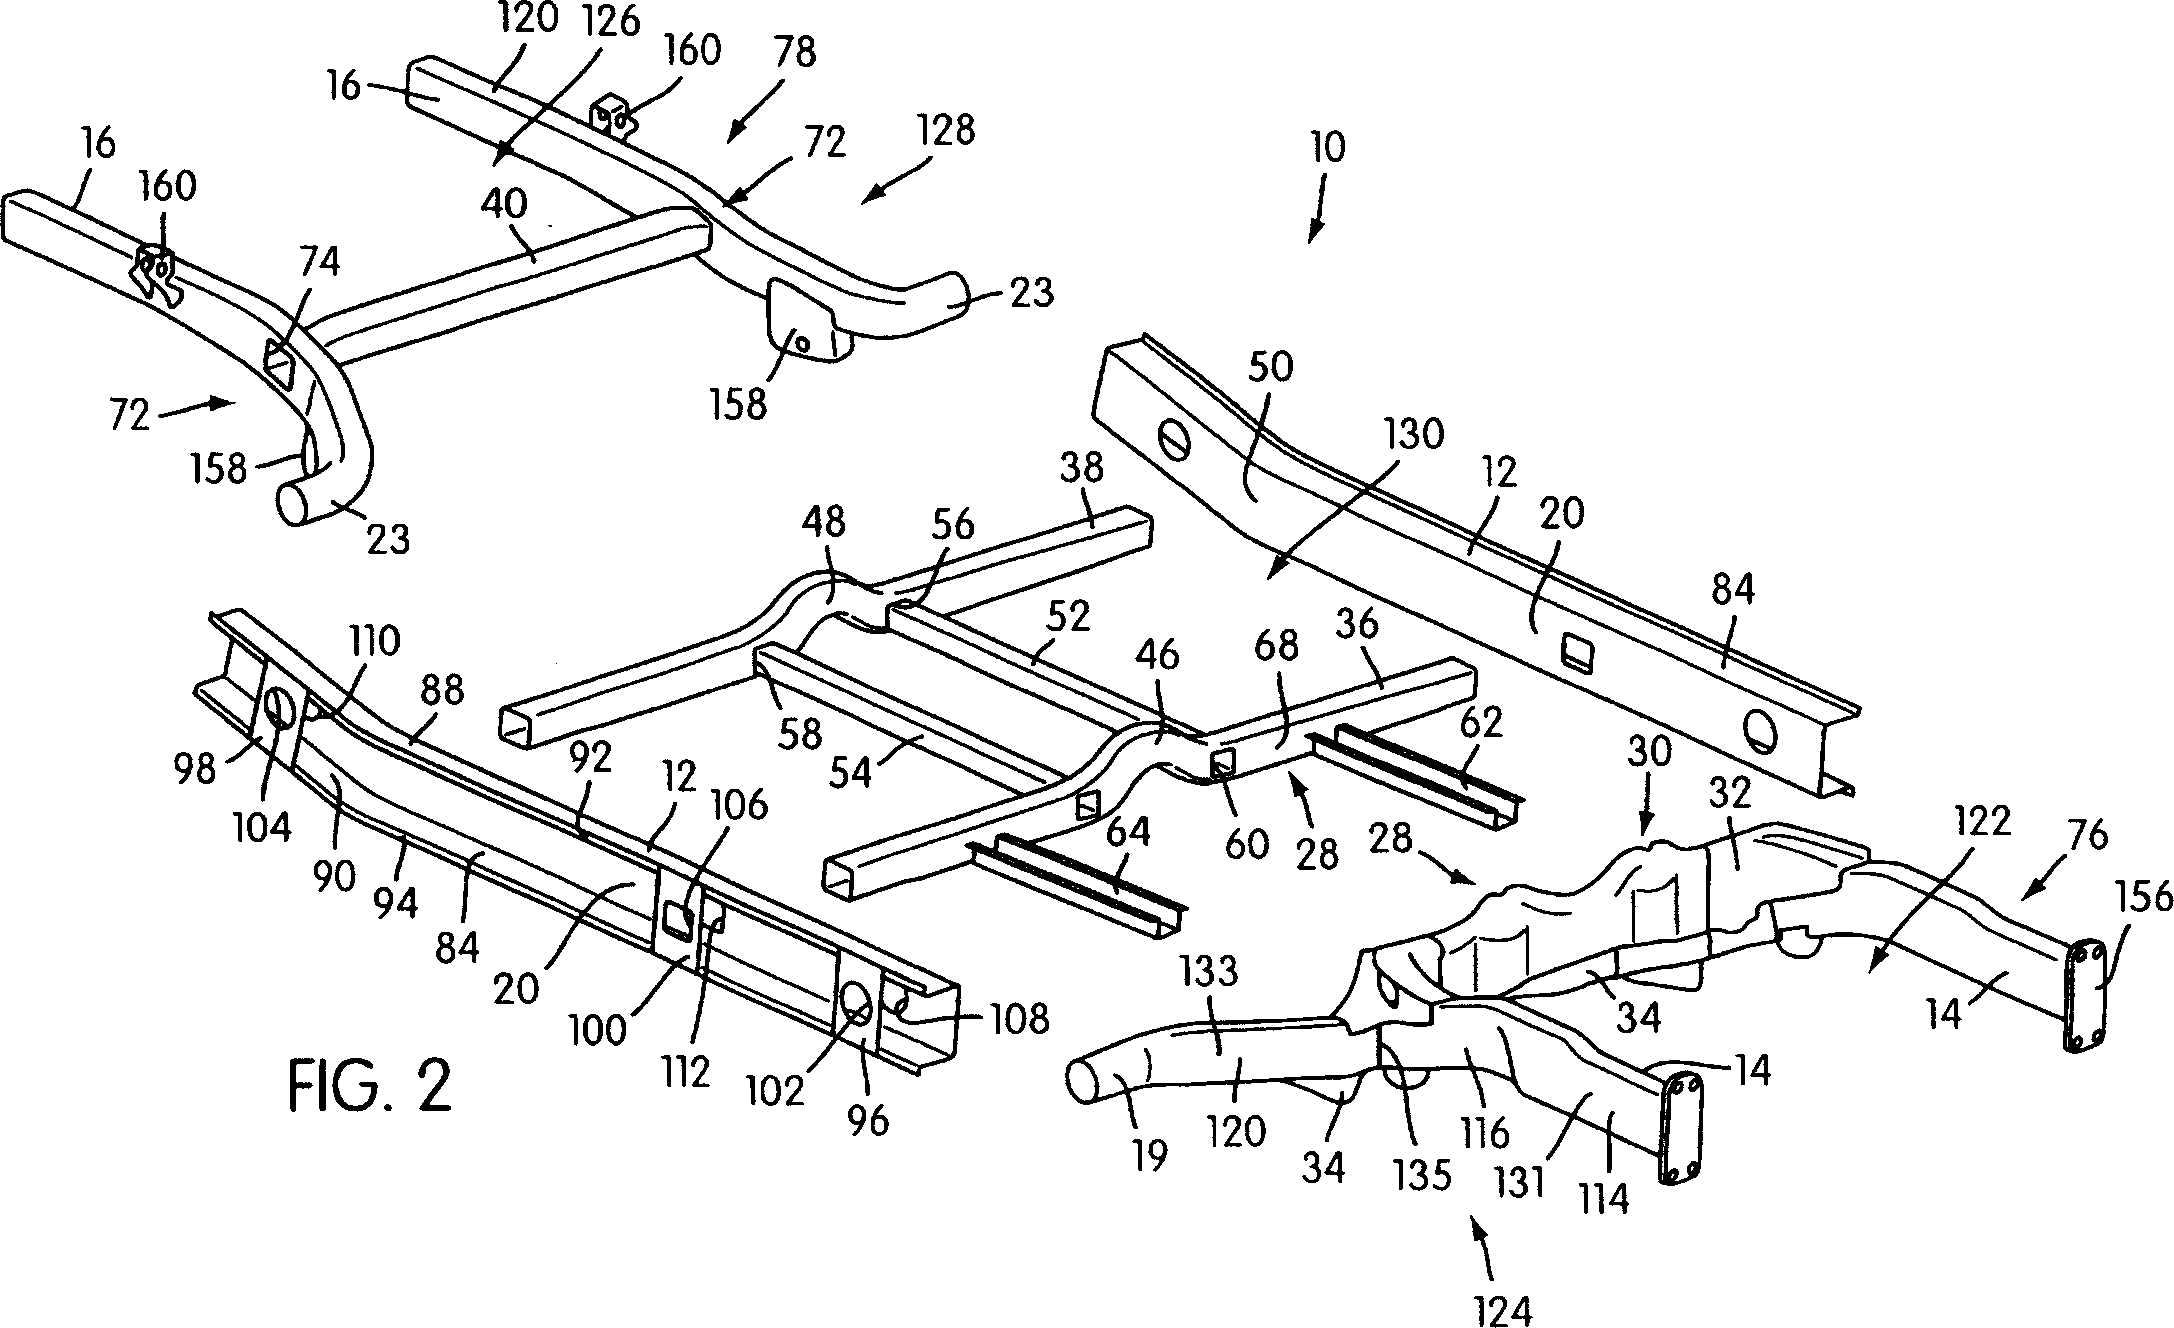 Modular underbody for a motor vehicle